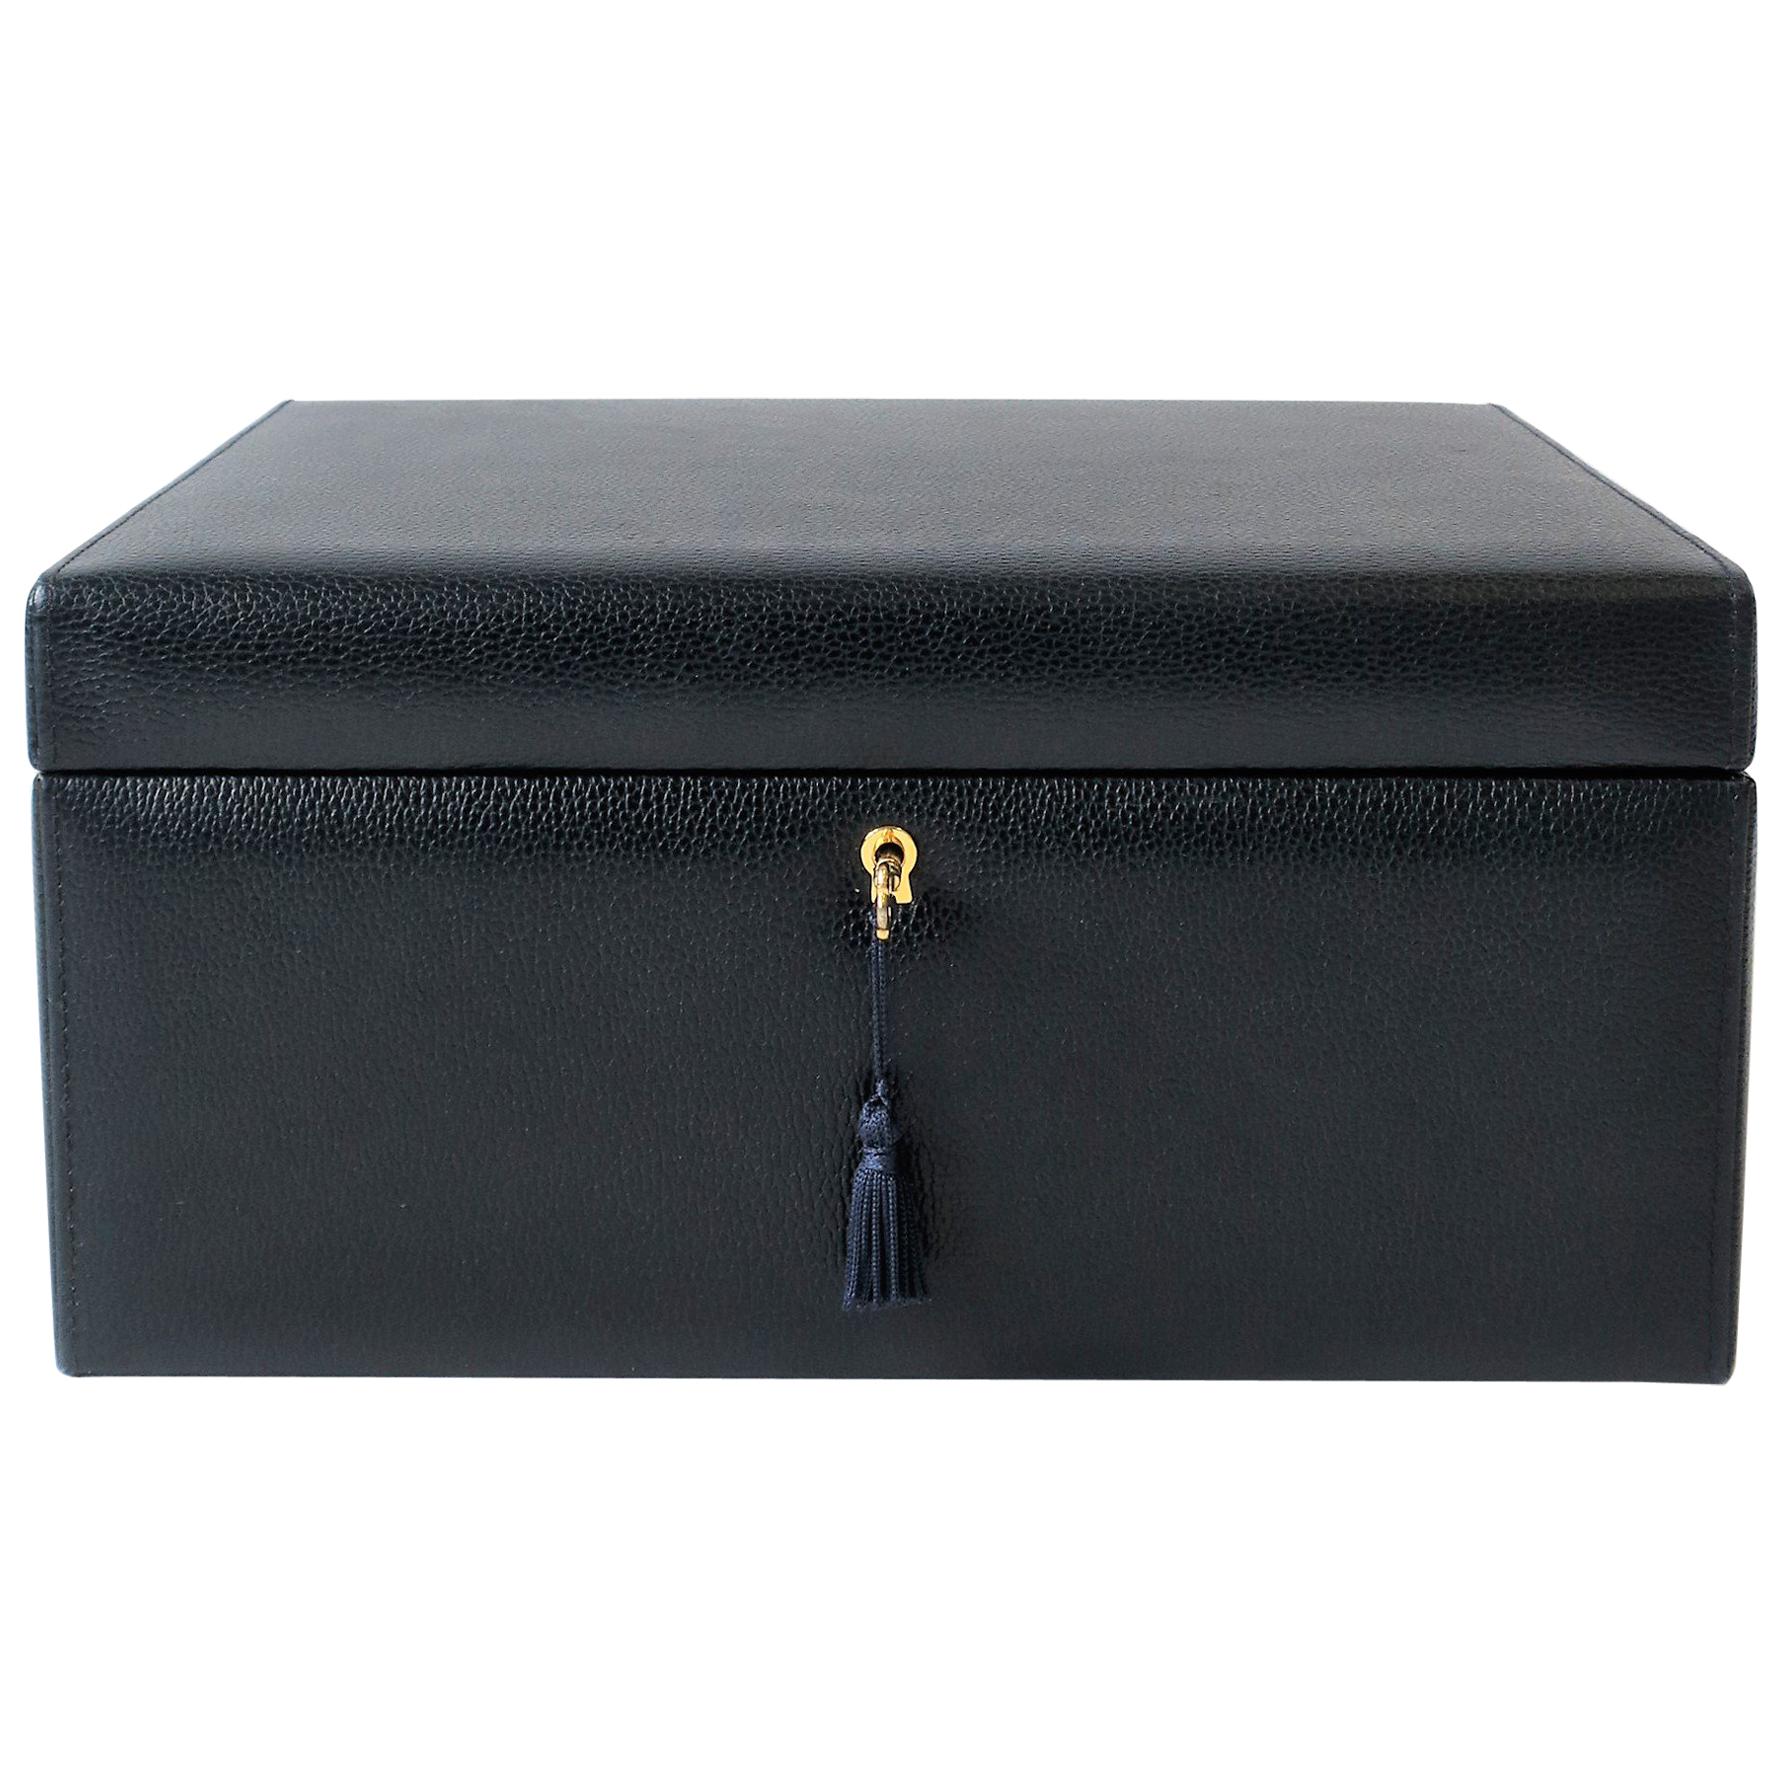 Italian Leather and Suede Jewelry Box